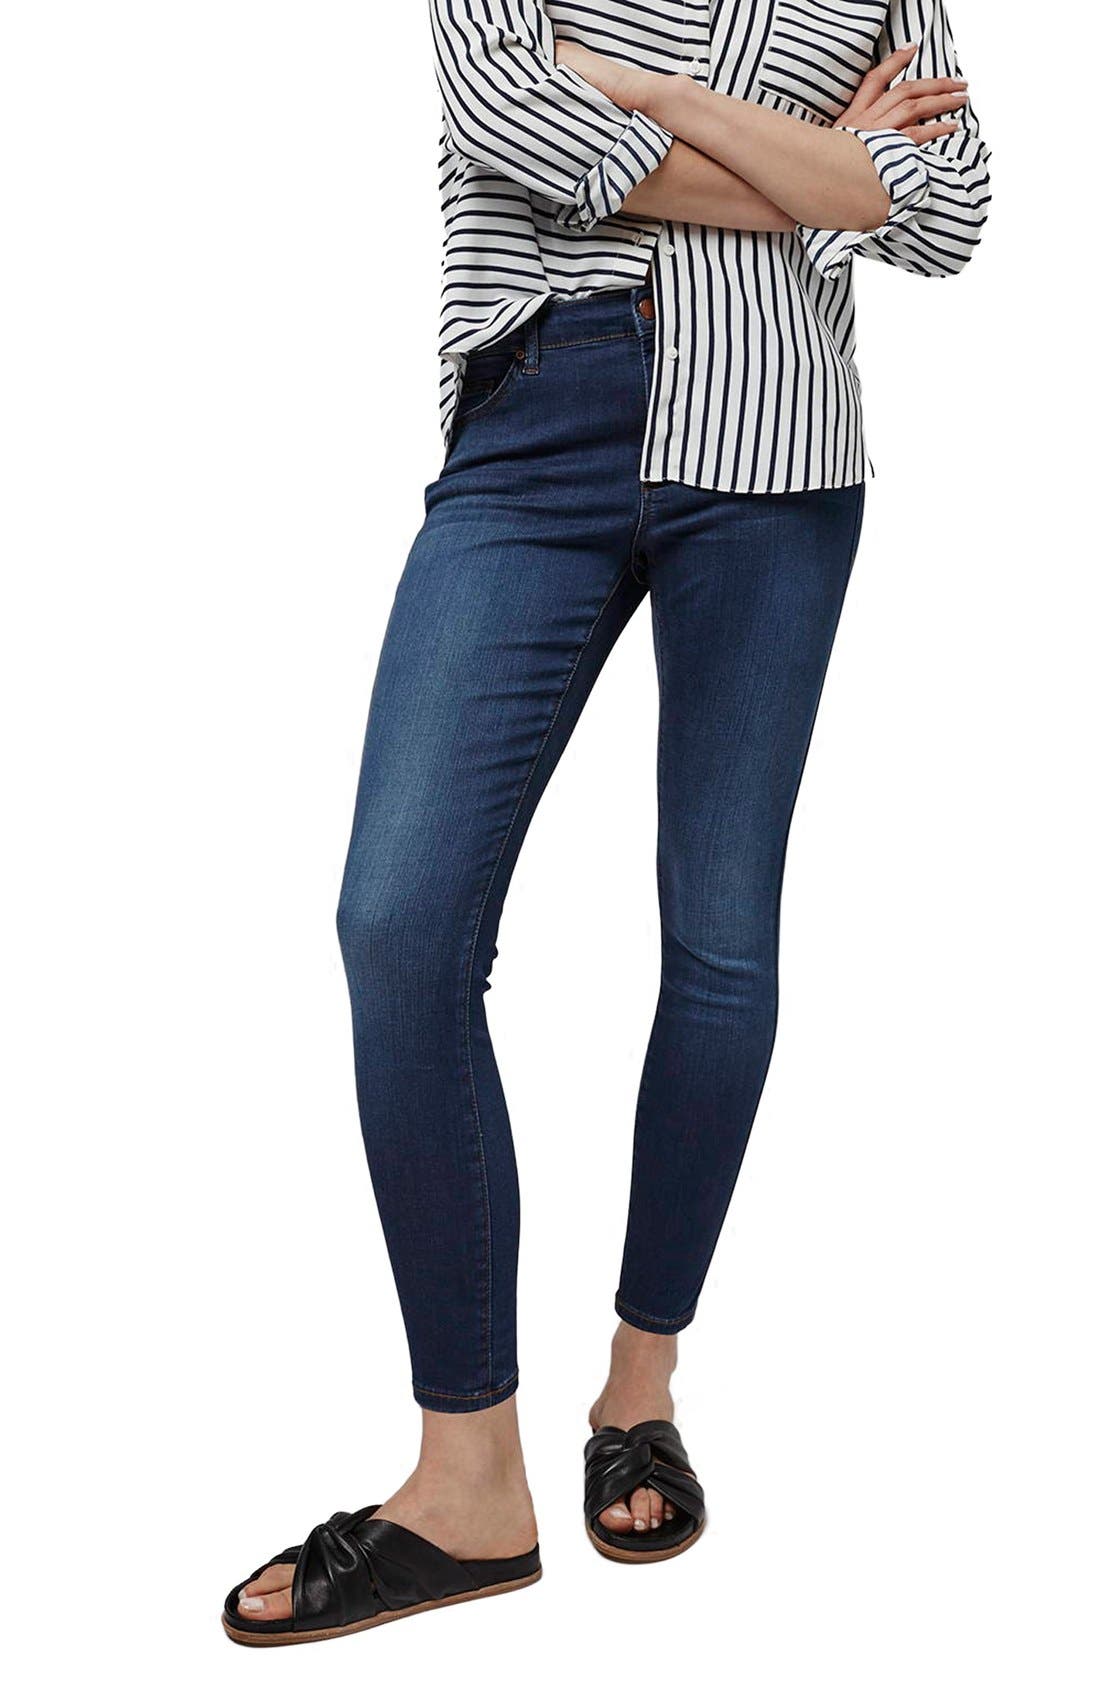 topshop leigh petite jeans